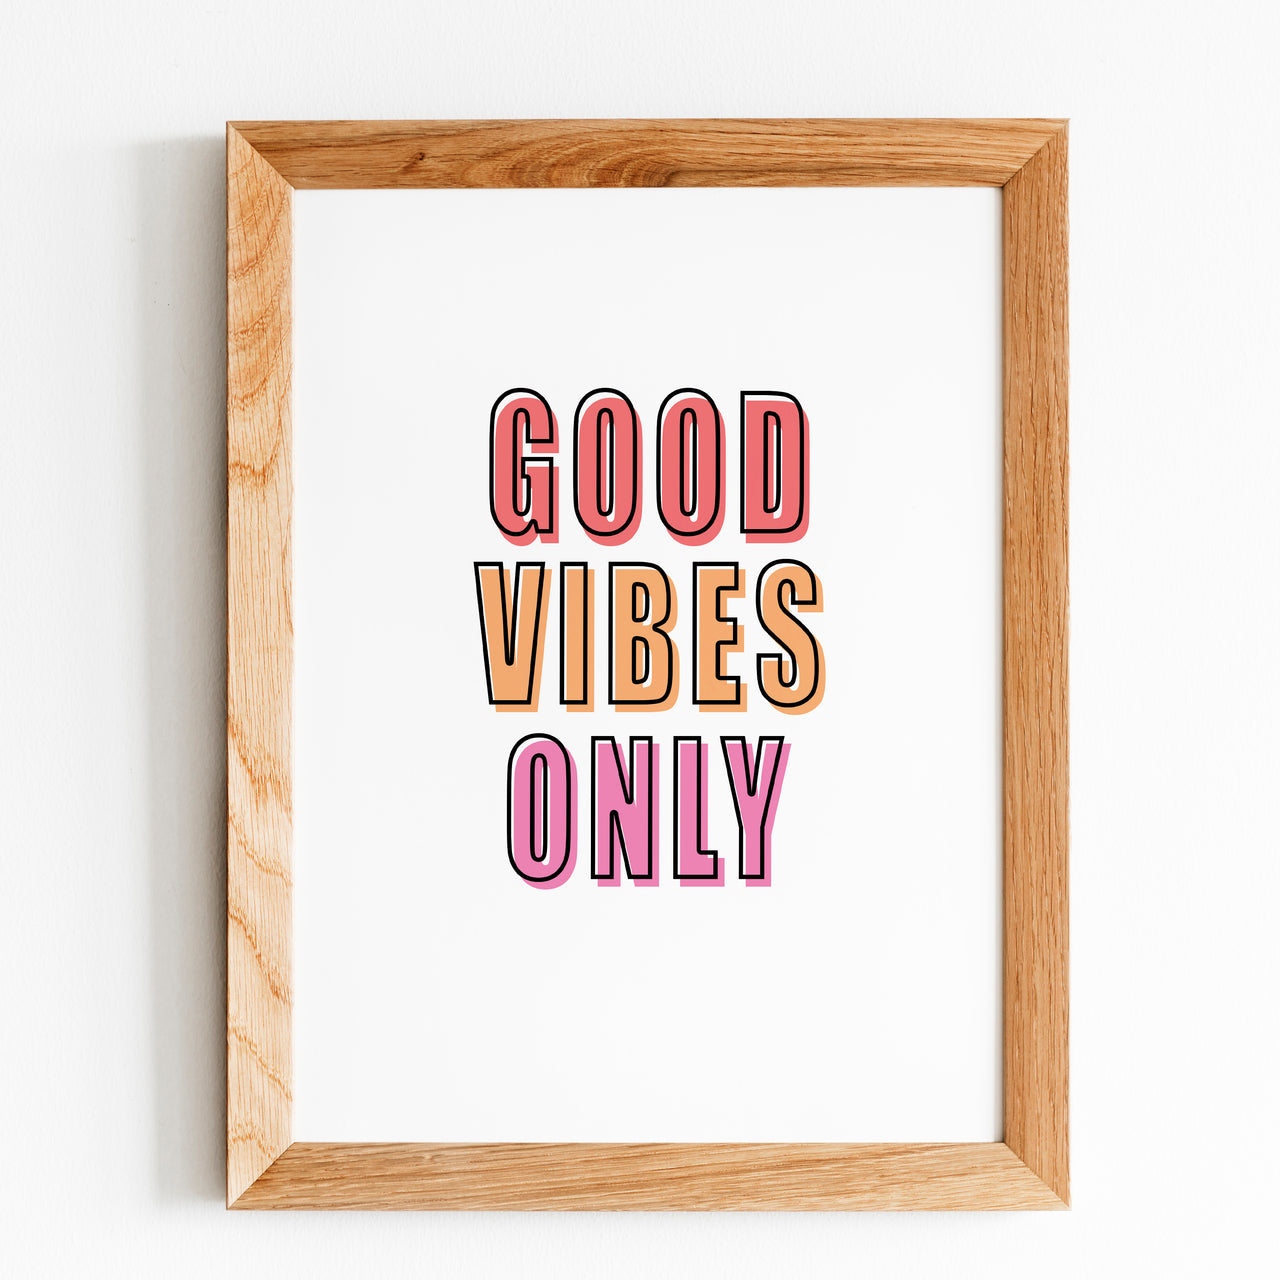 Good Vibes Only Framed Print by Gert & Co